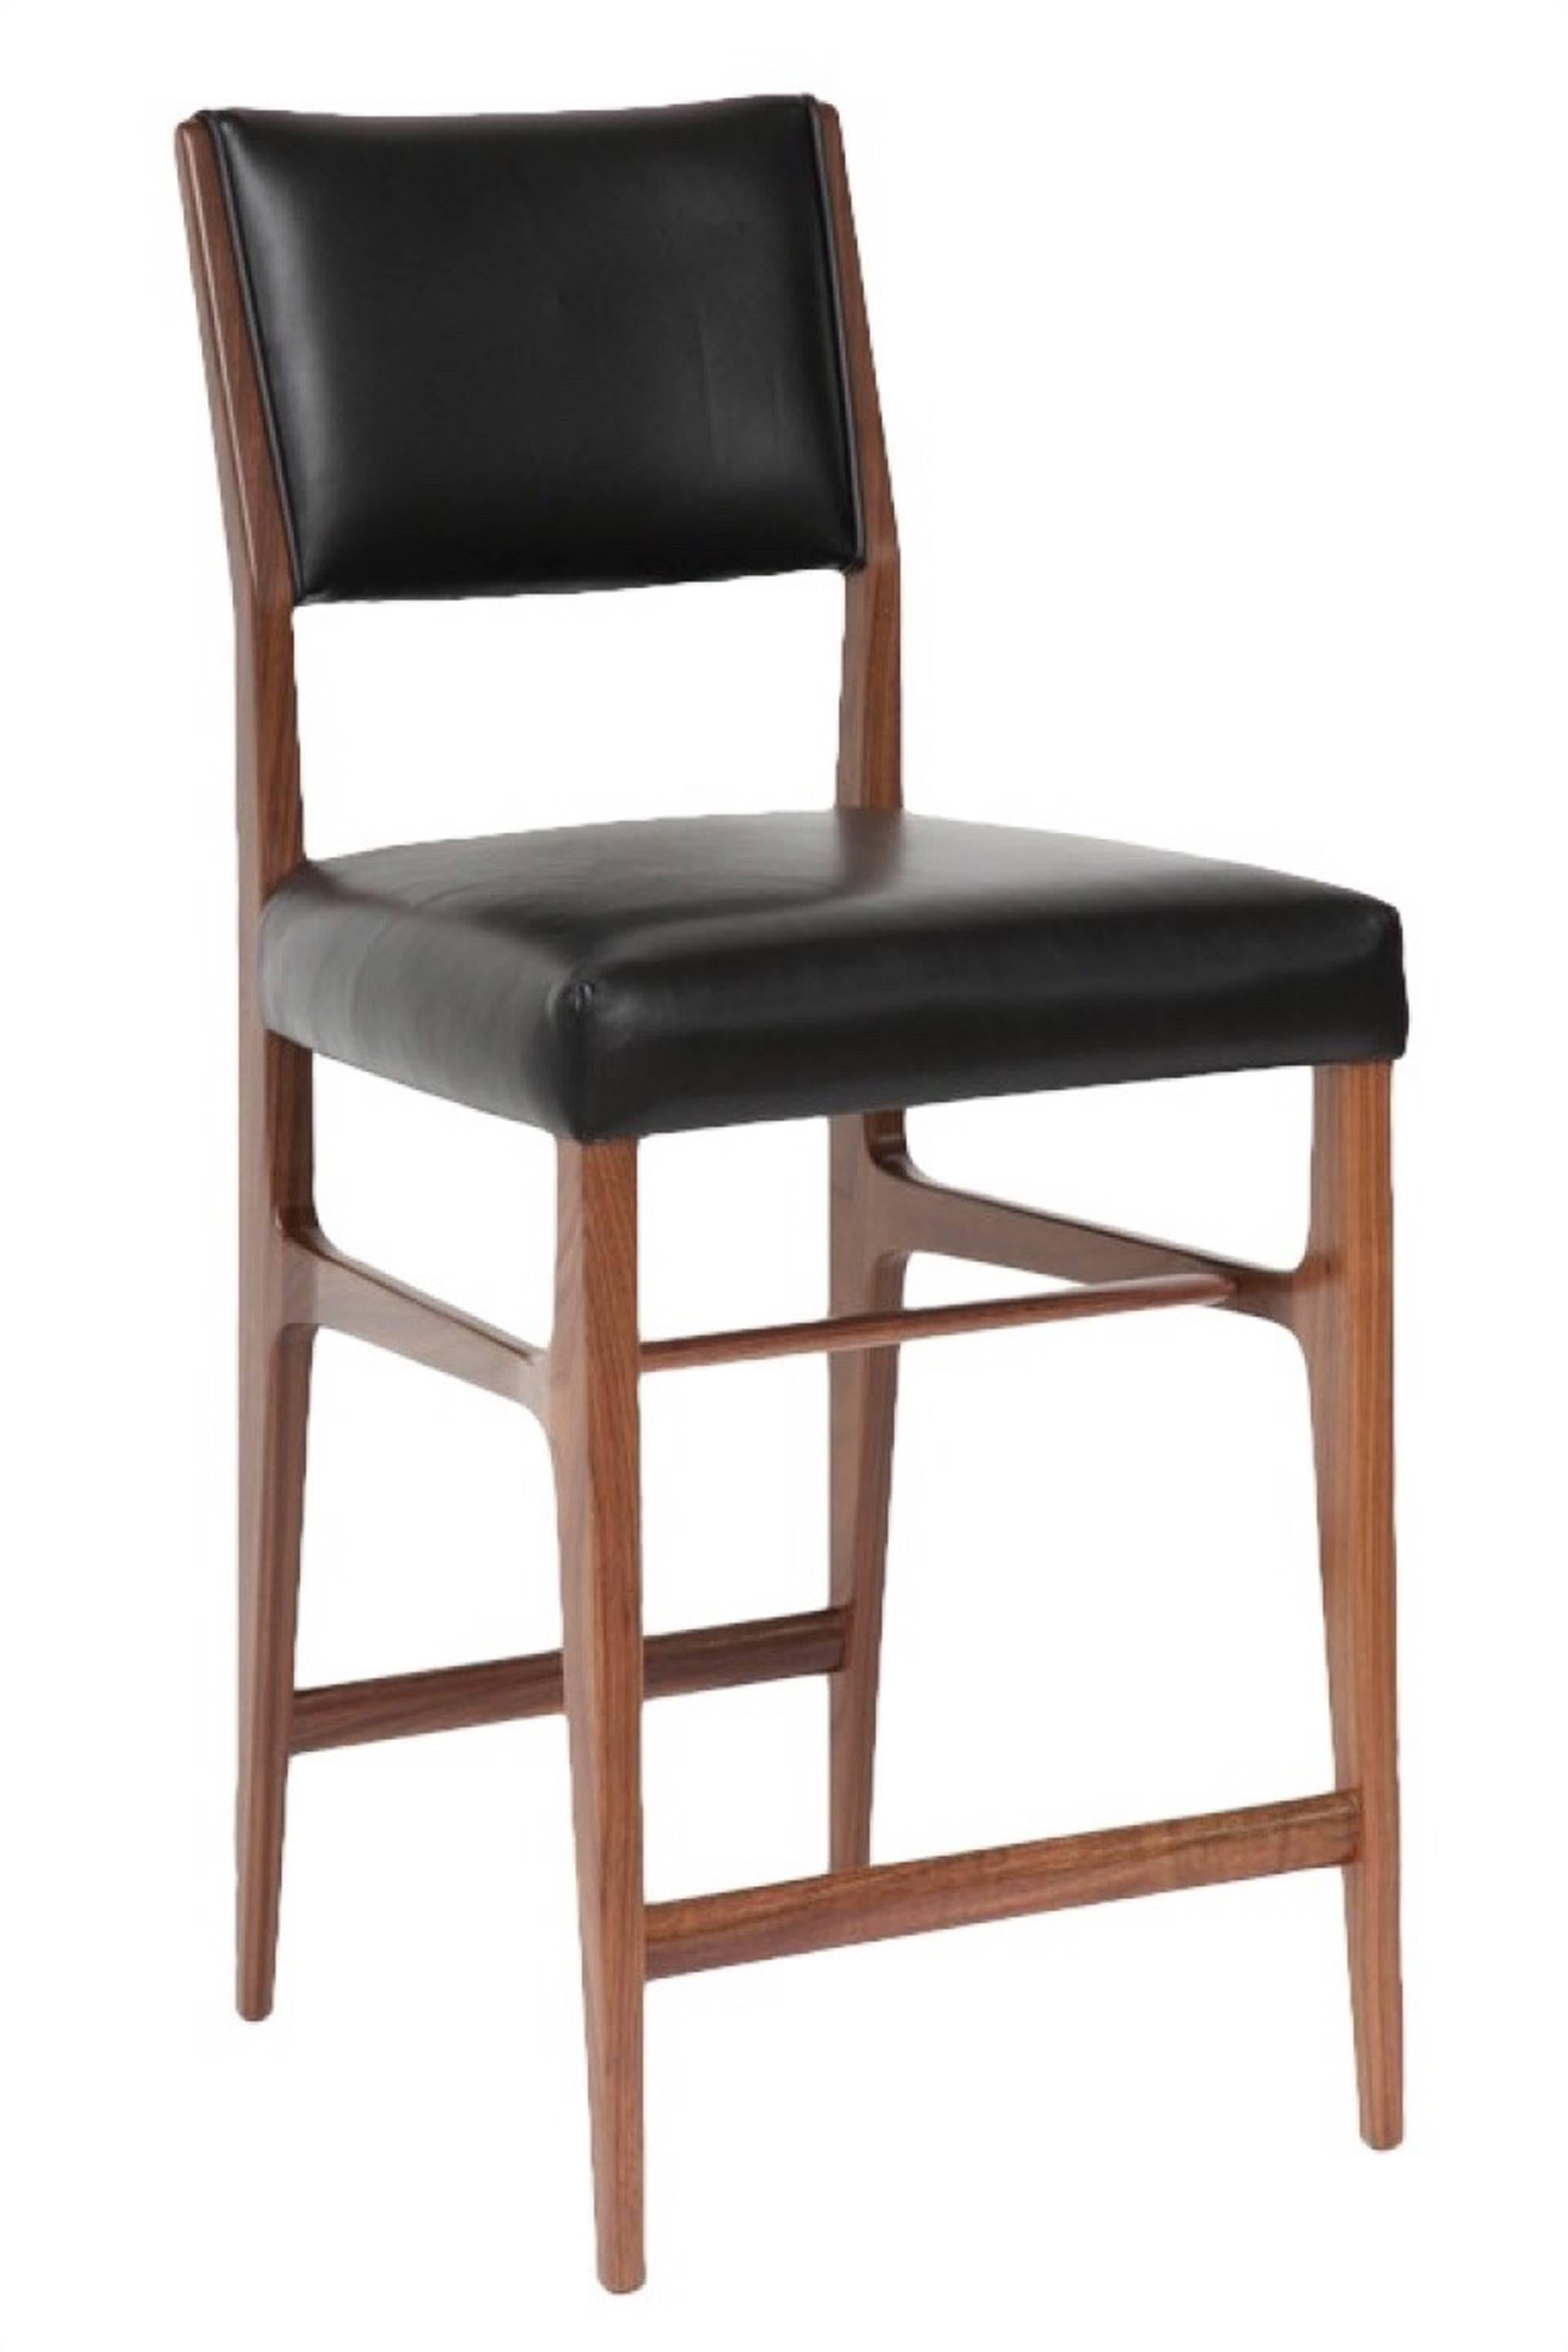 Maze walnut counter stool.
Measures: Seat height-25”
Custom orders have a lead time of 8-10 weeks FOB NYC. Lead time contingent upon selection of finishes, approval of shop drawings (if applicable), and receipt of 1.5 yards COM / 30 sq. feet COL